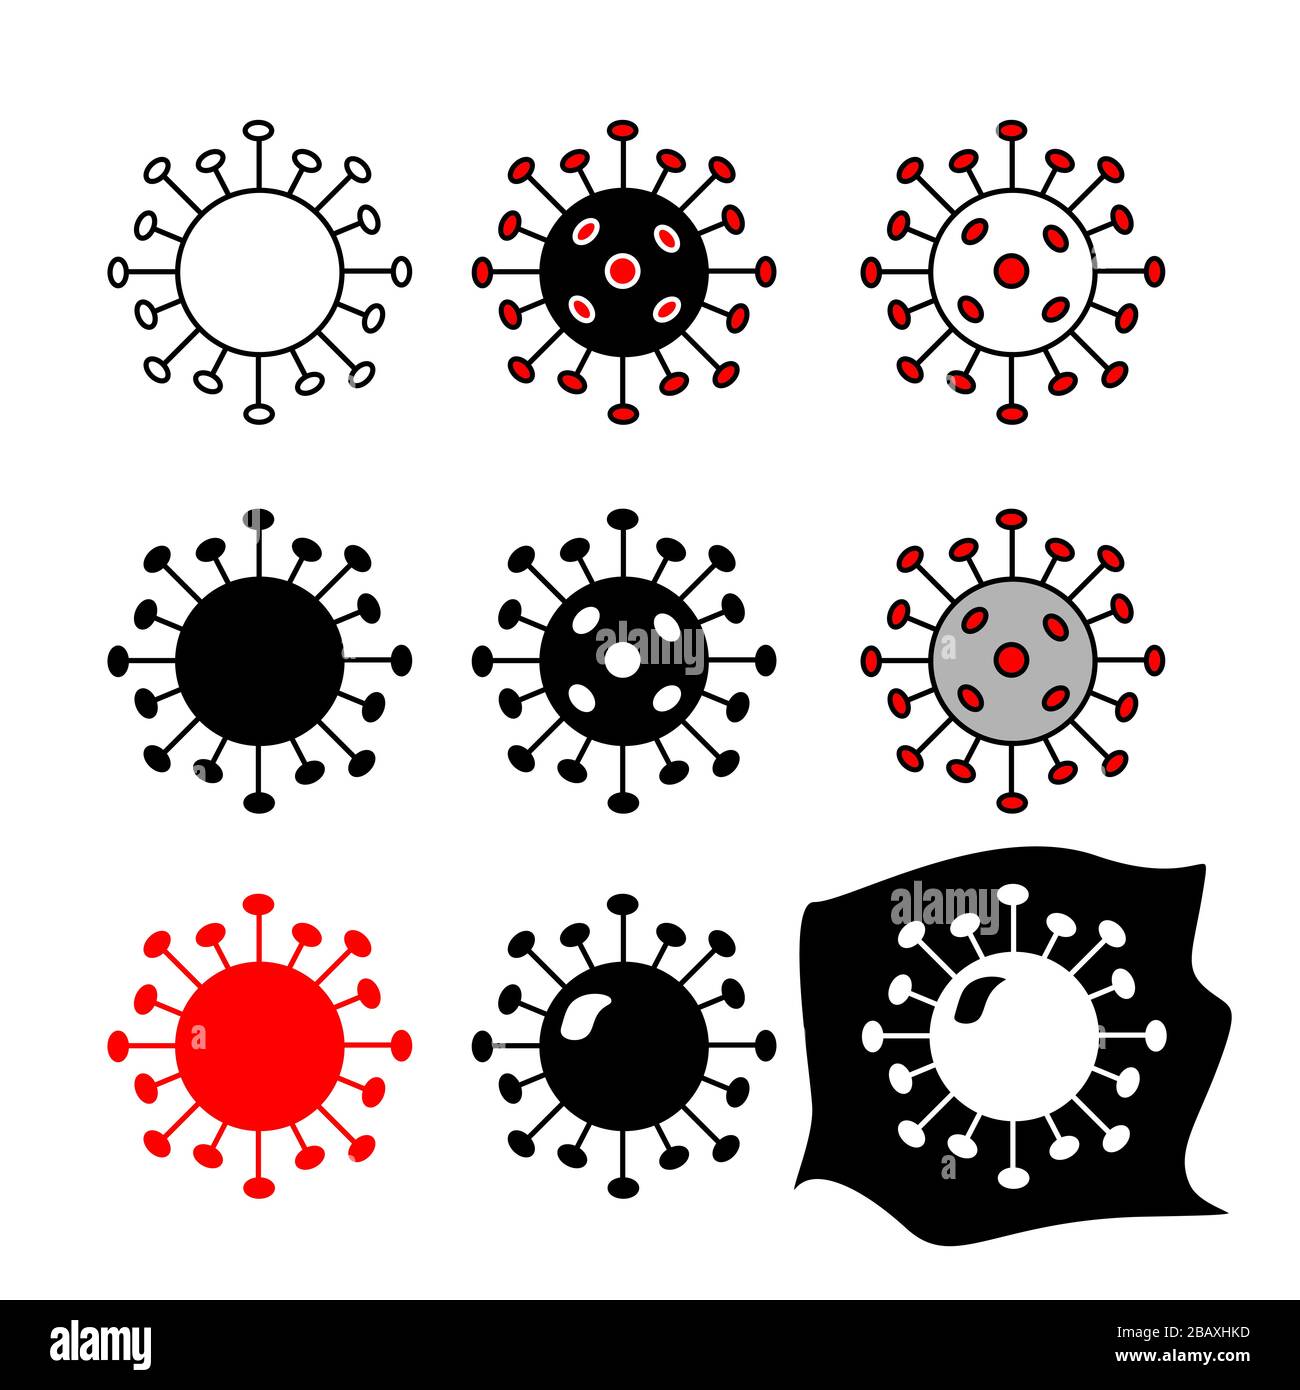 COVID-19 Ccoronavirus figures with different shapes and colours. Can be used as design element for presentation, news, templates etc. Stock Photo